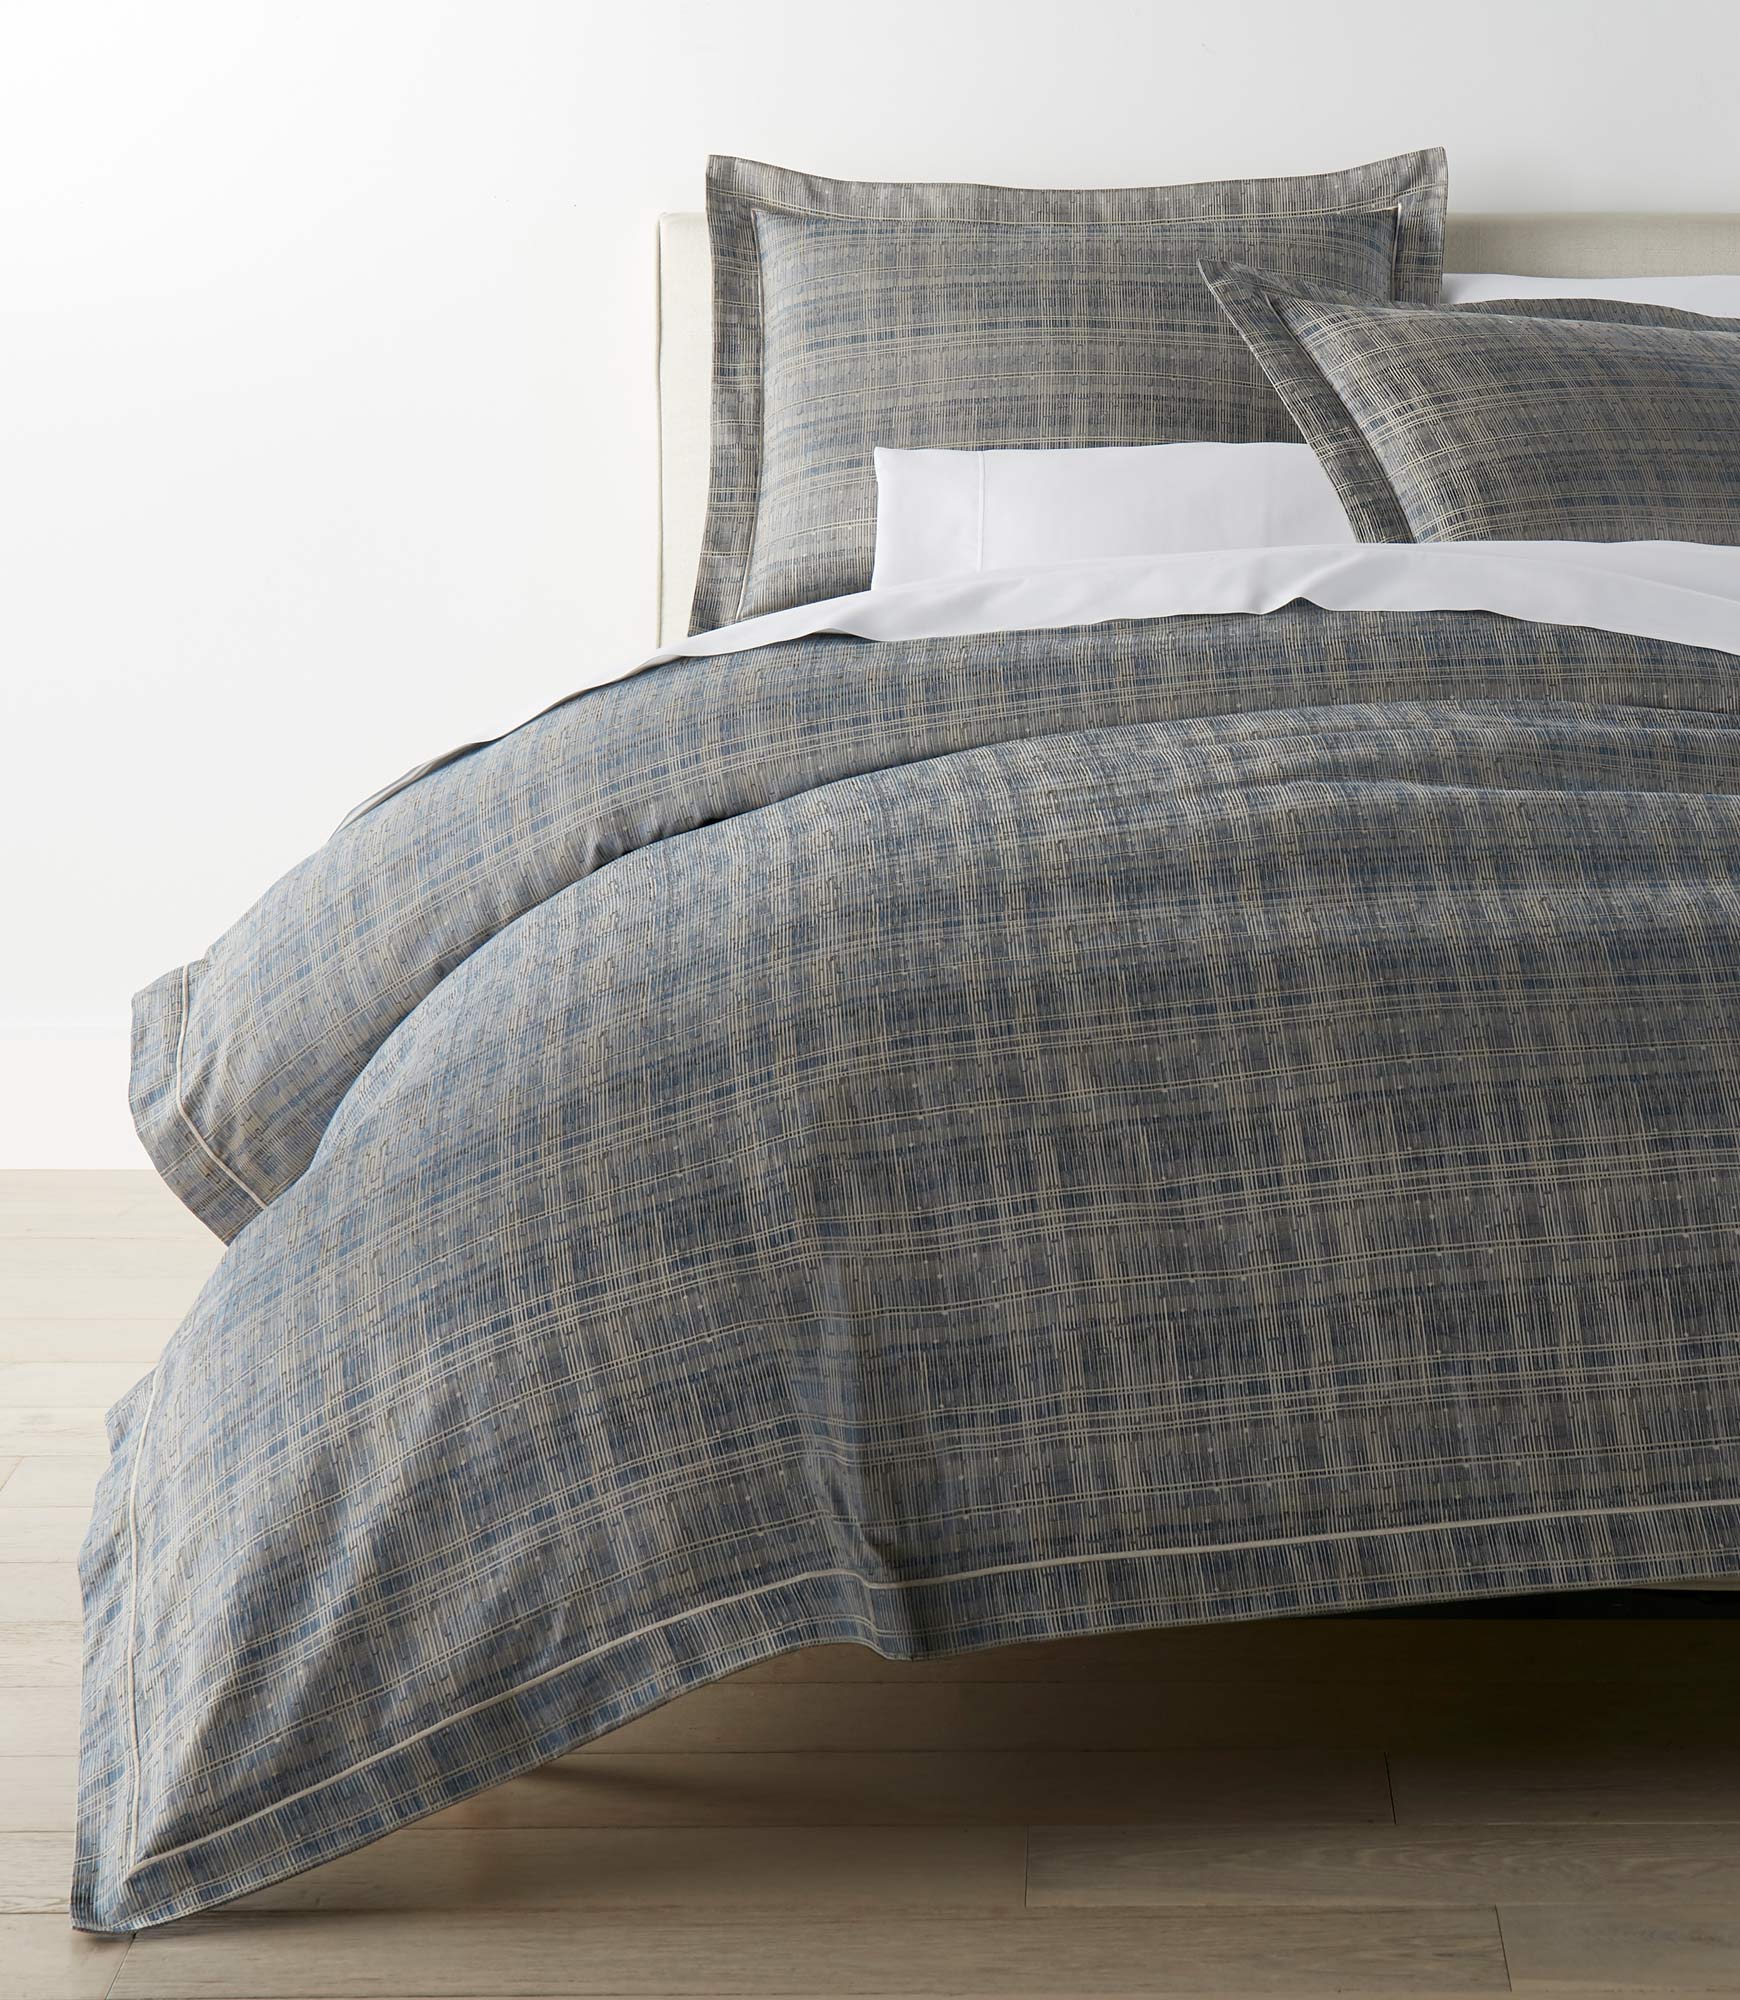 Lang offer Fru Jacquard Bedding: Biagio Jacquard Quilt Duvet Cover | Peacock Alley